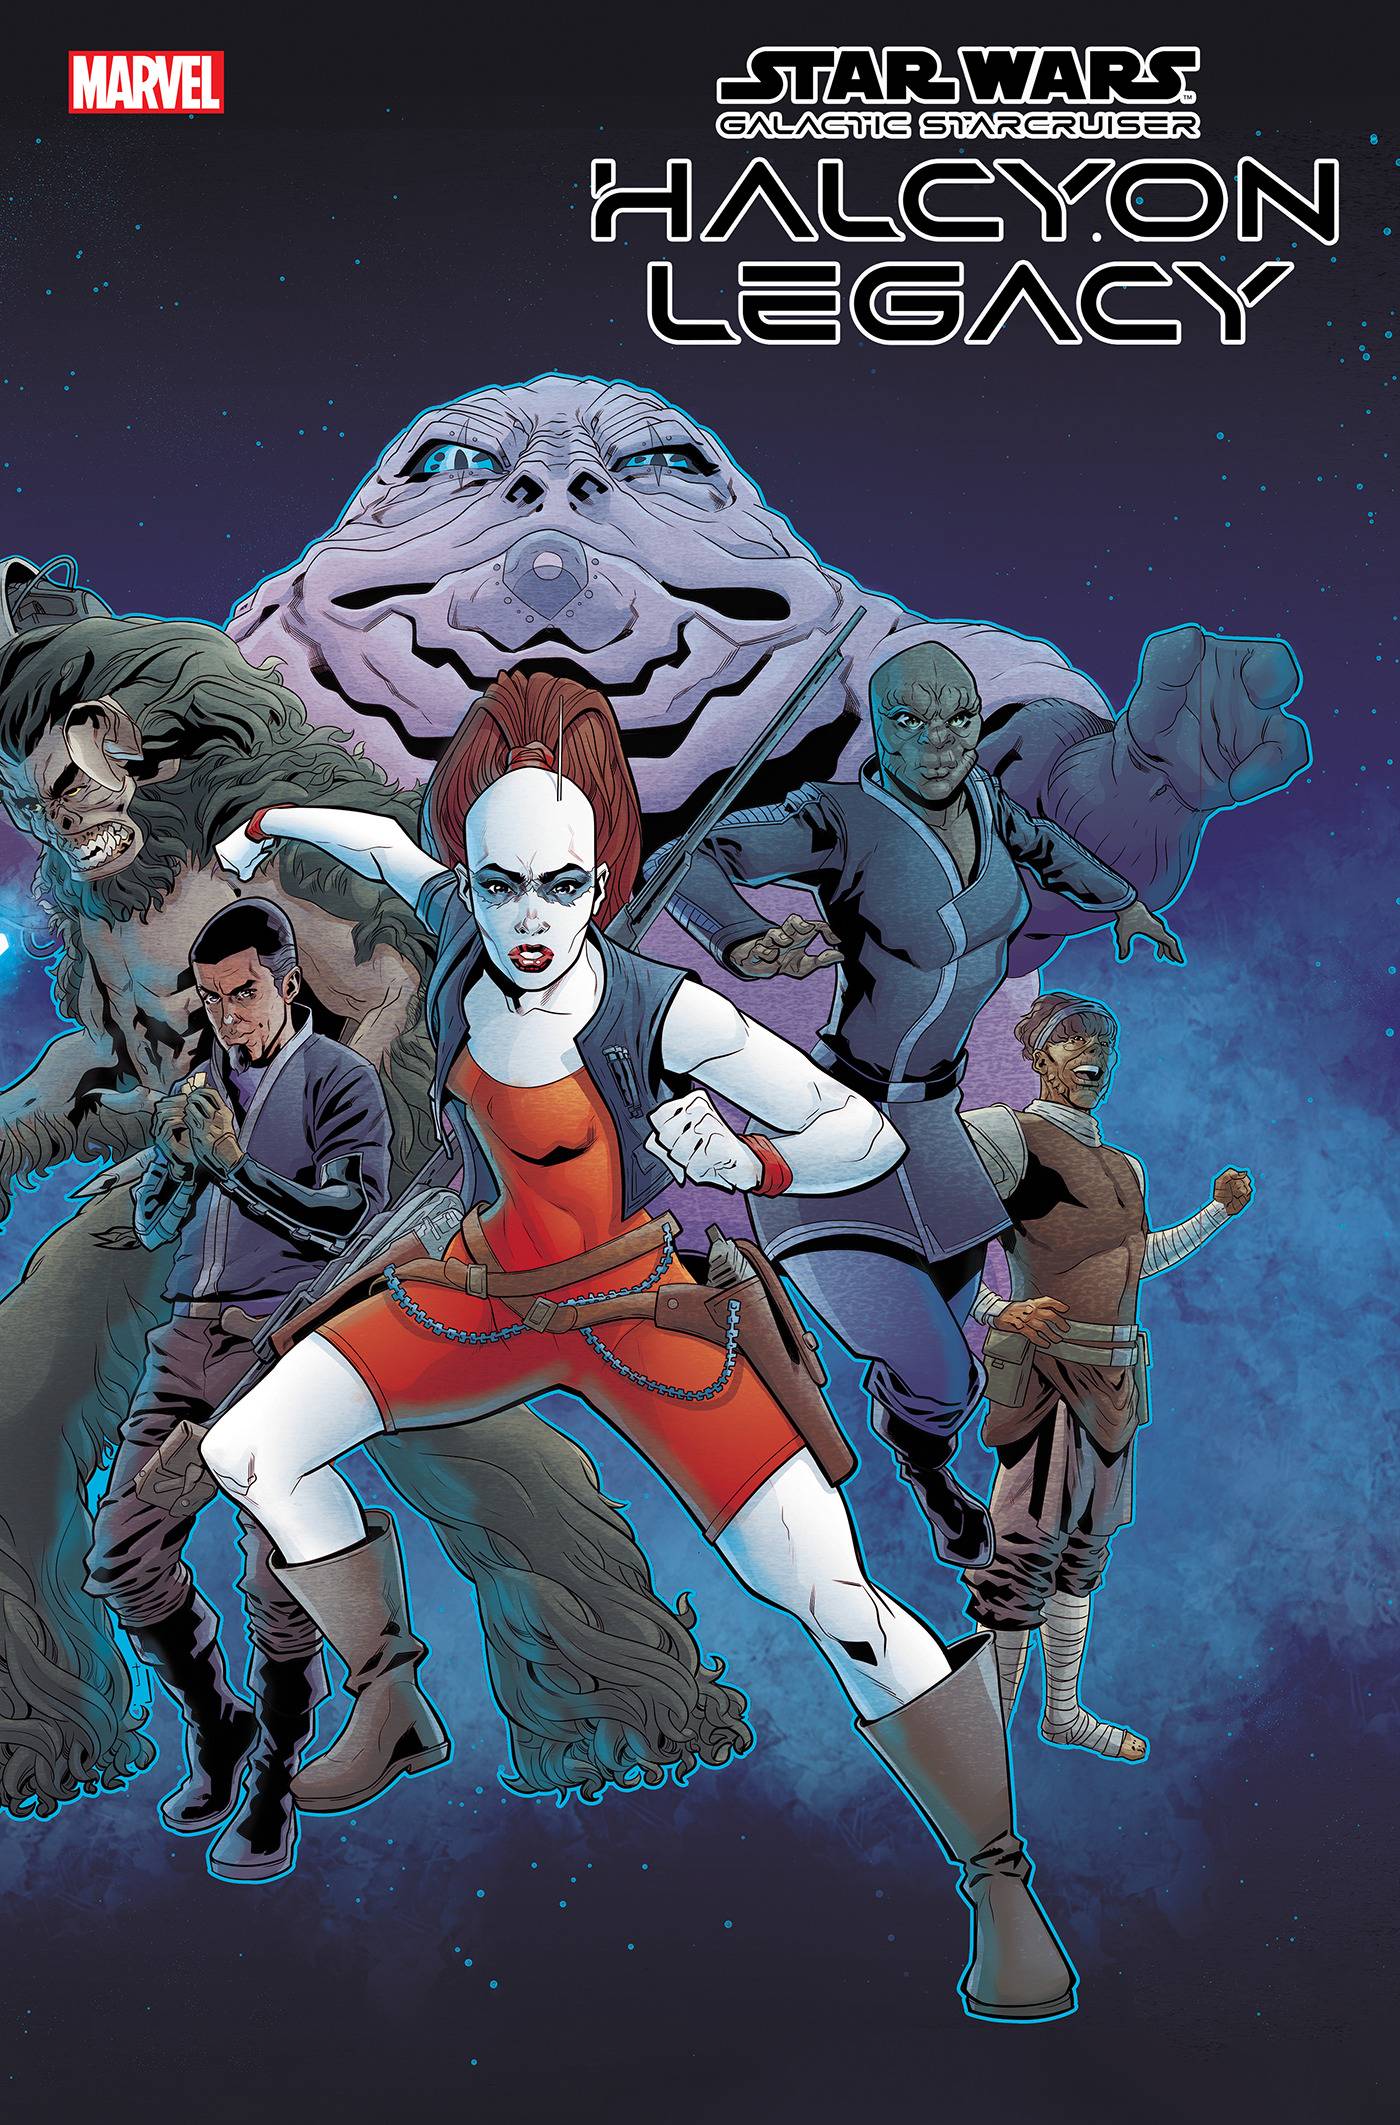 STAR WARS HALCYON LEGACY #2 (OF 5) SLINEY CONNECTING VAR